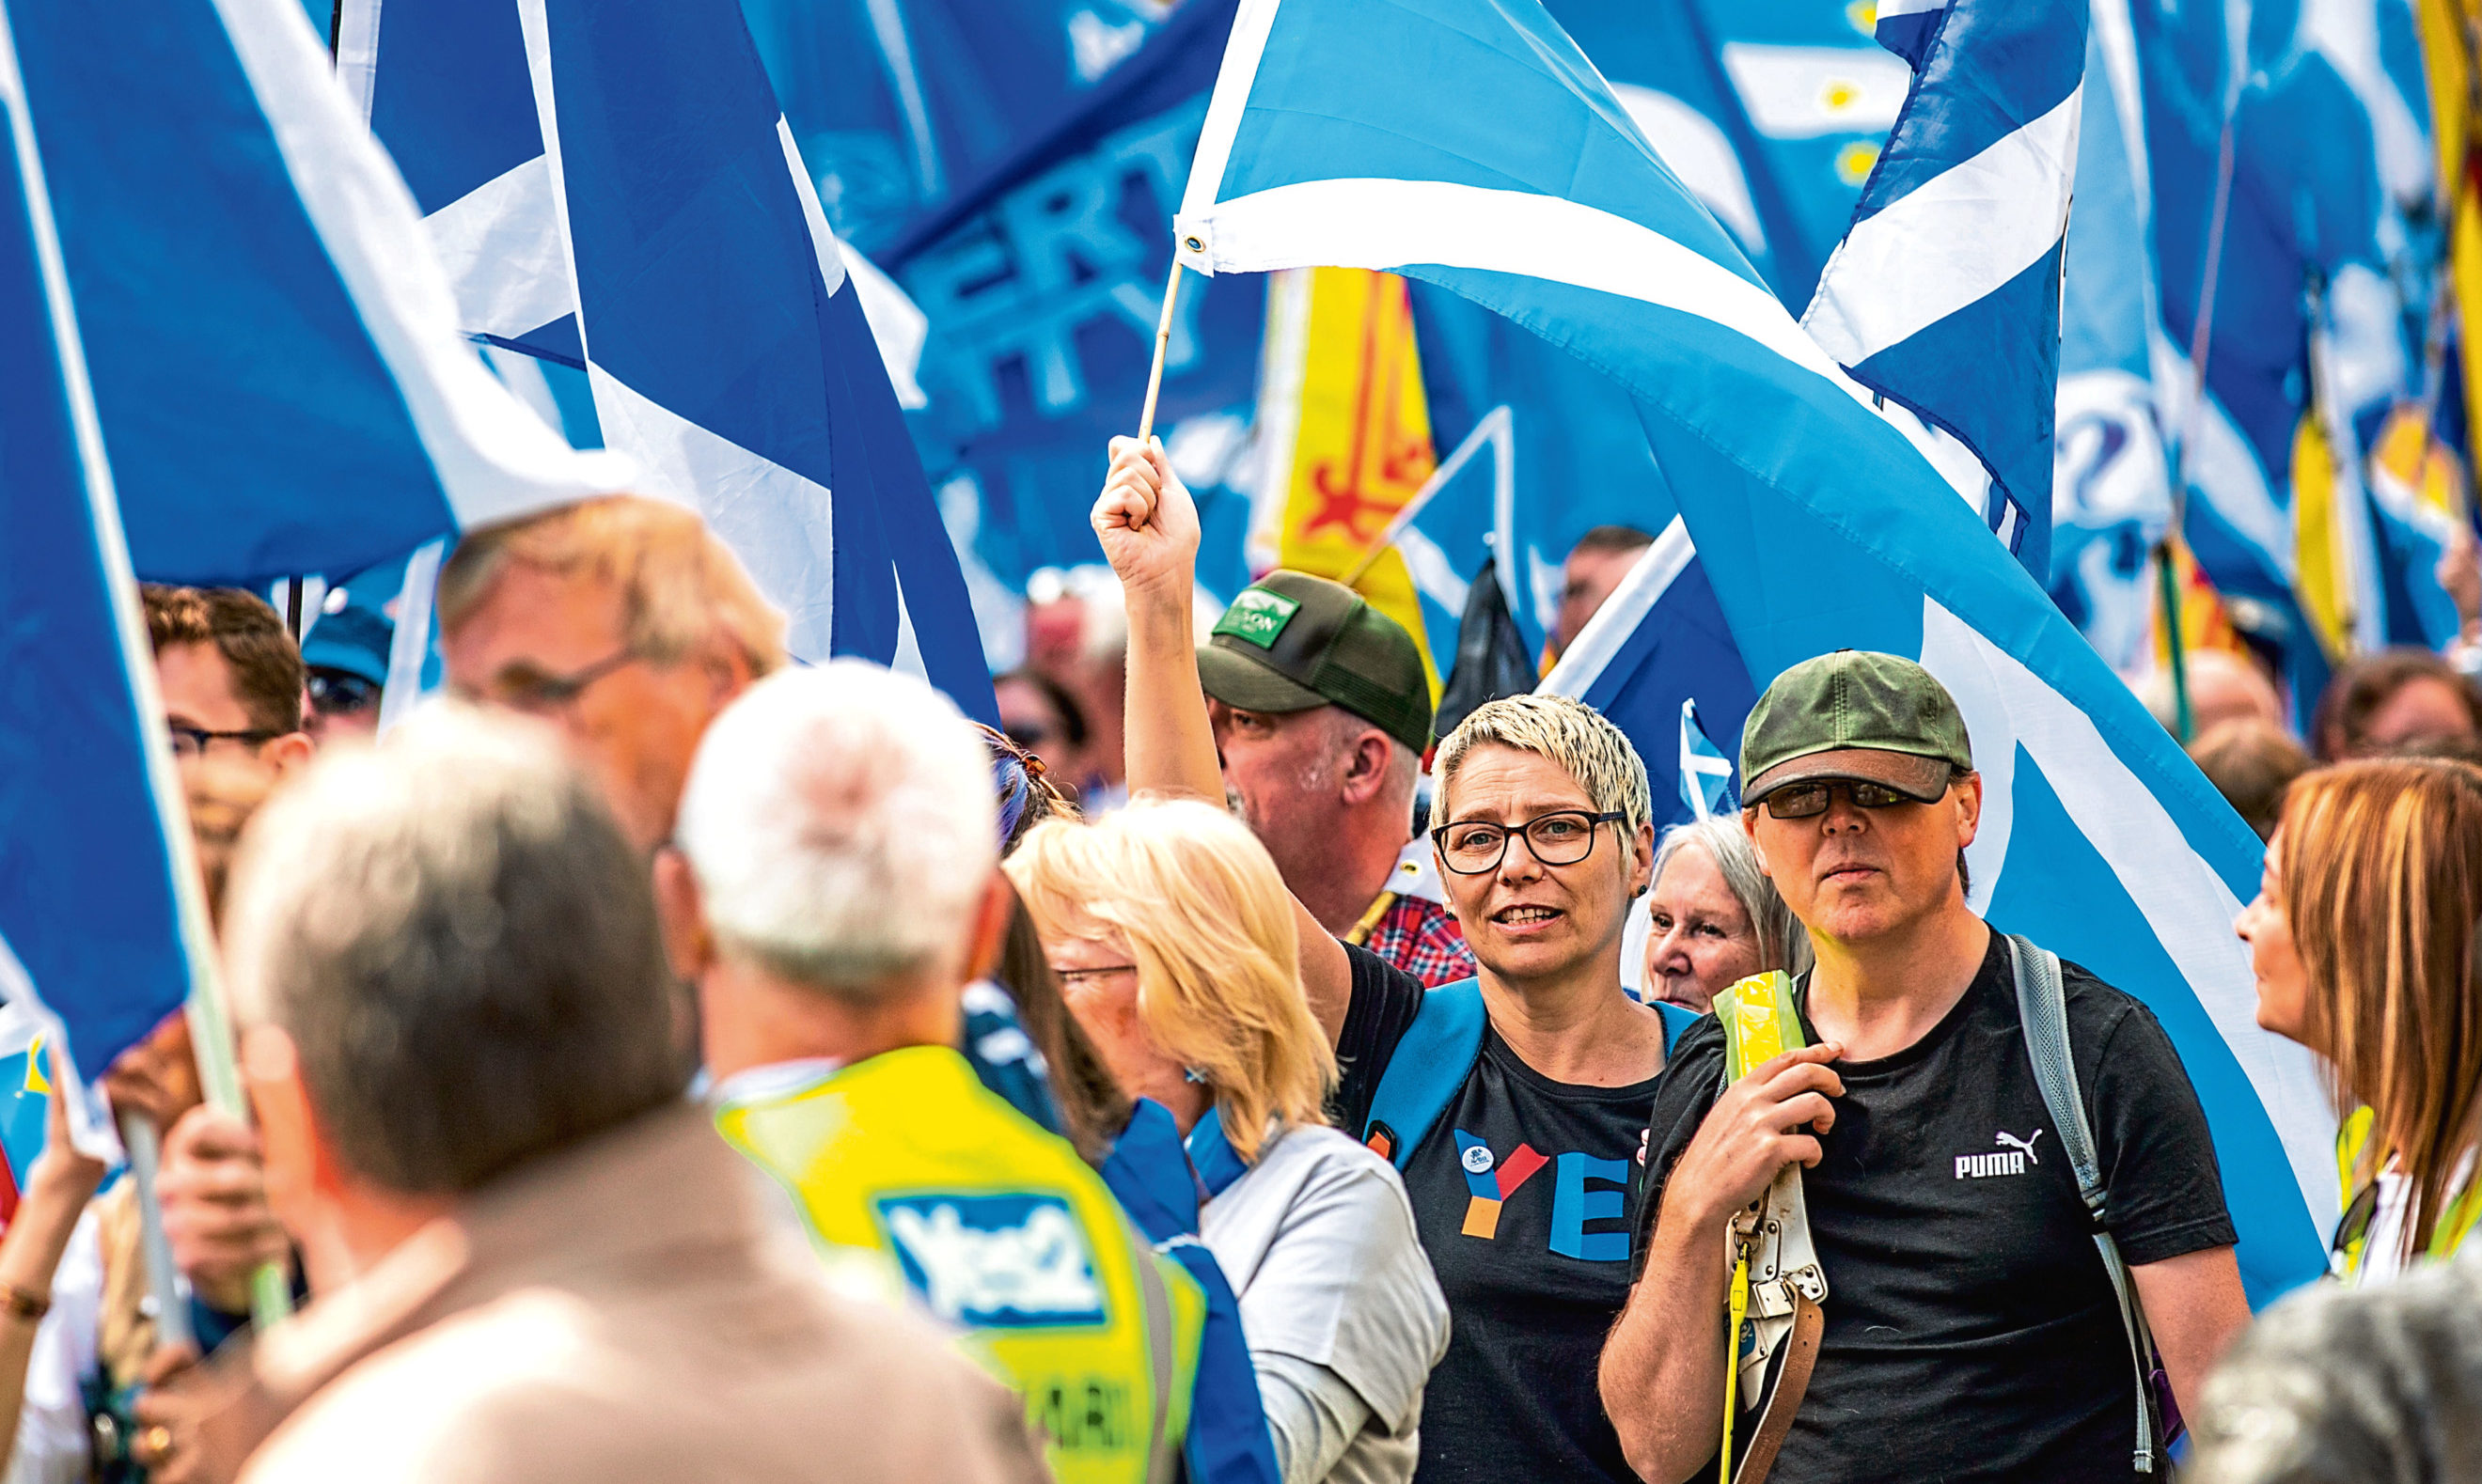 The All Under One Barrier pro-independence march took place in Perth in September.